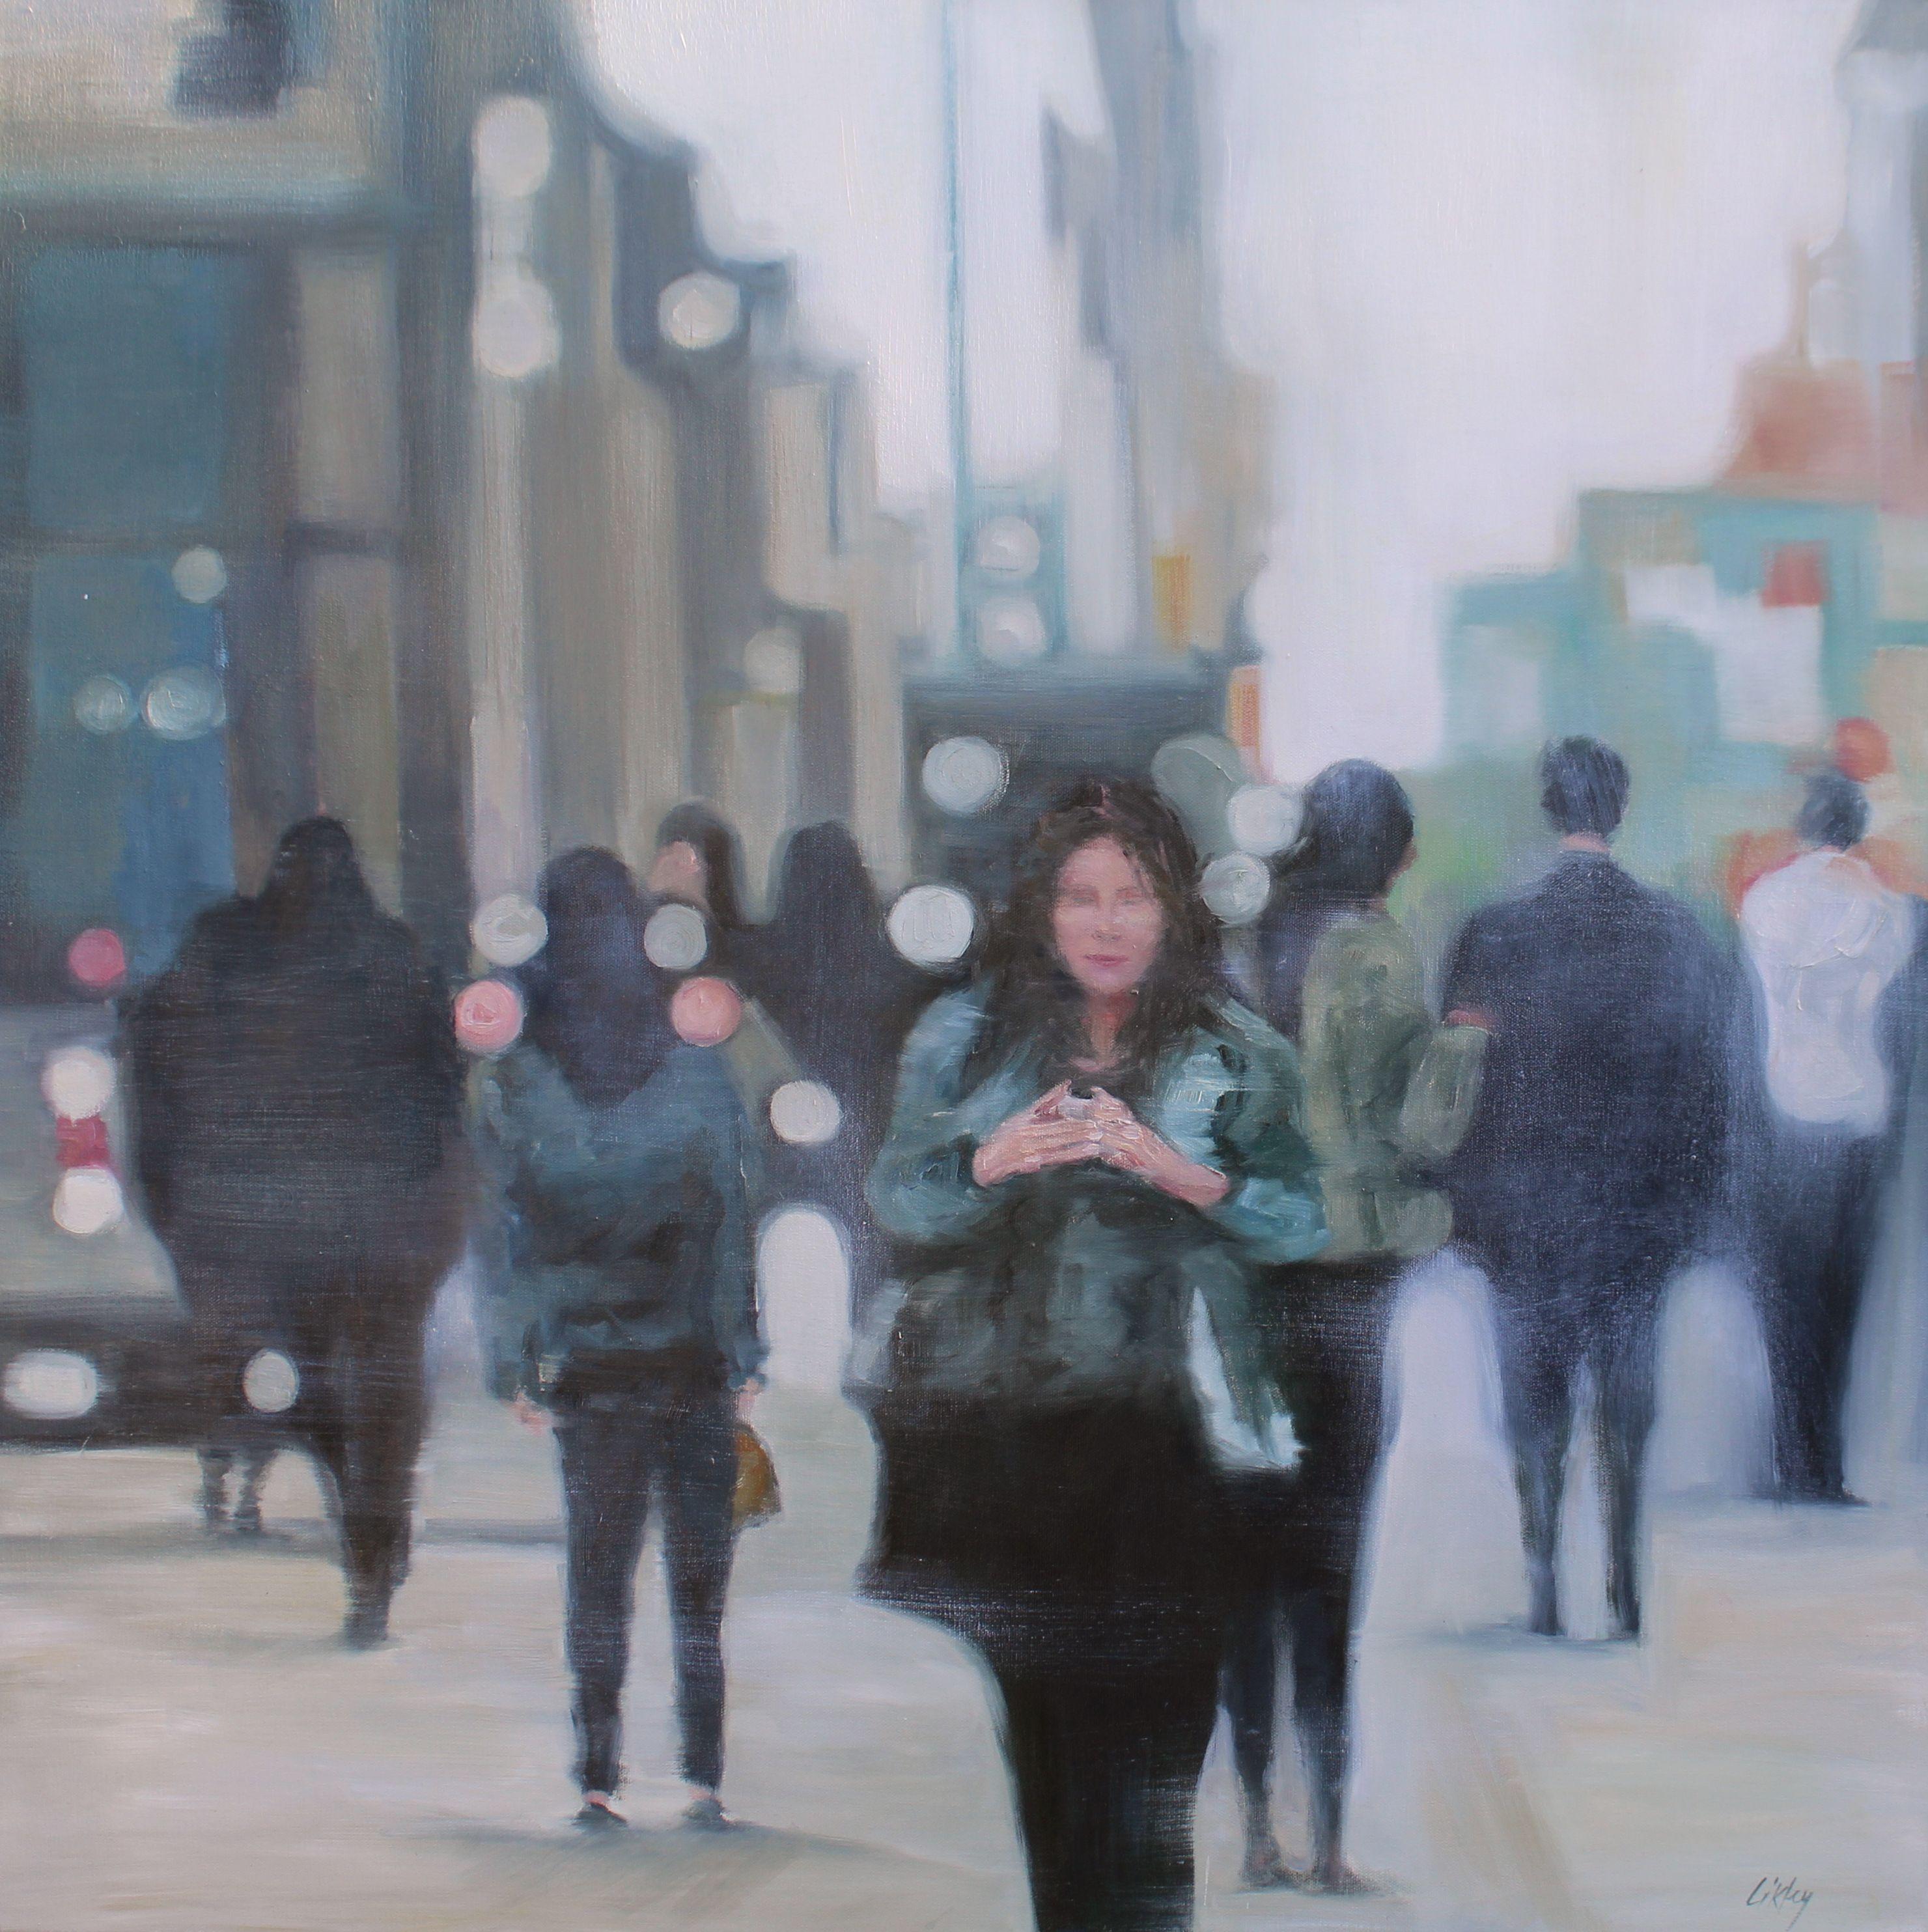 As she walks away from the crowd on her own she seems intent and focused on the task at hand. The painting is soft and blurred to add to the  feeling of peace and serene that is felt even in the busyness of the day. :: Painting :: Expressionism ::